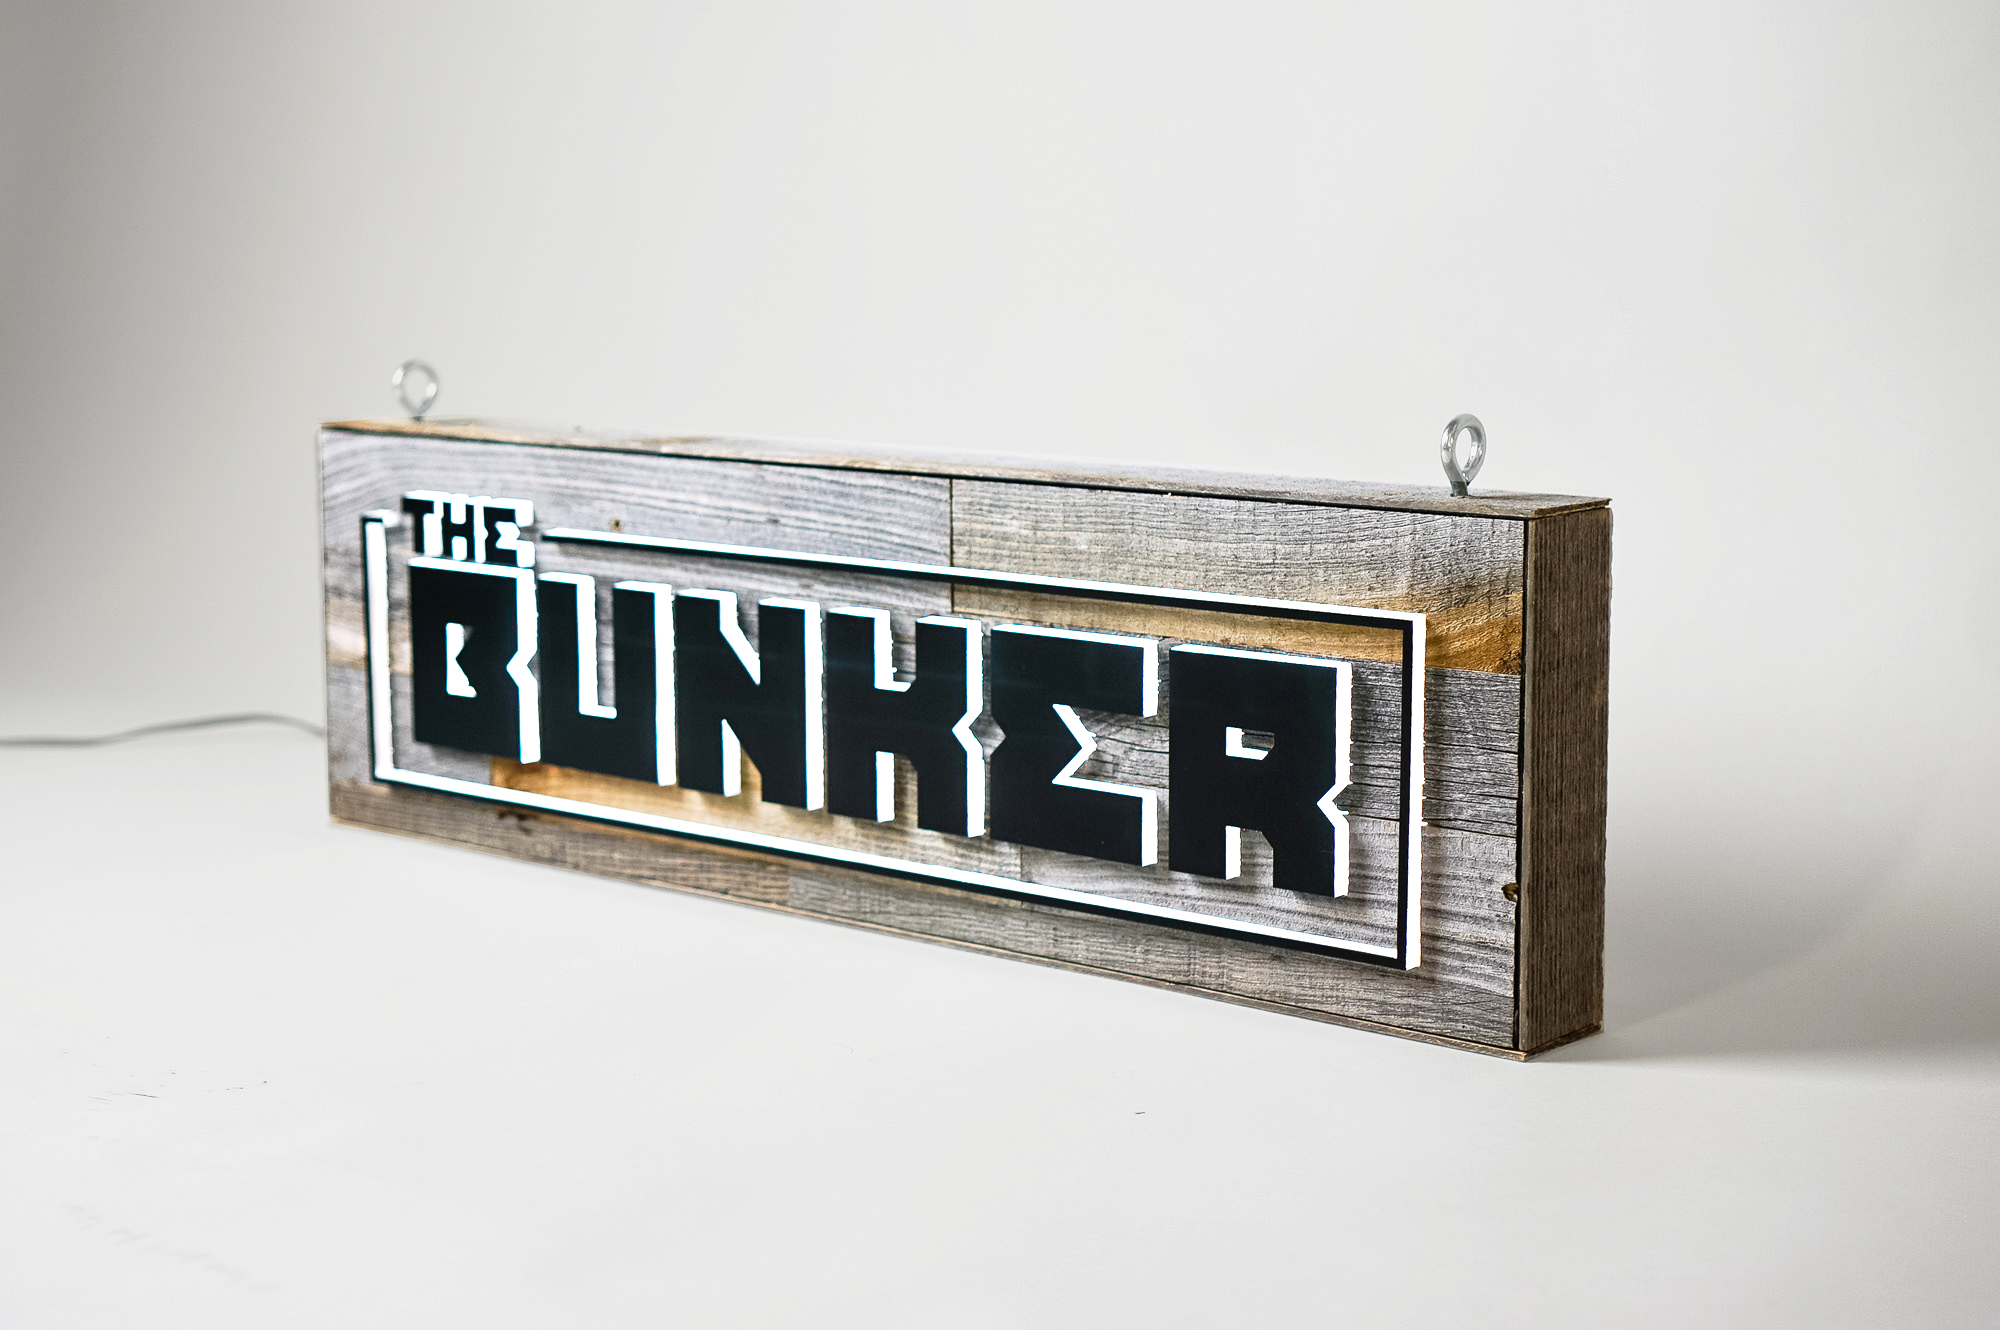 Illuminated, reclaimed wood sign for The Bunker, a comedy club in Burbank, CA.